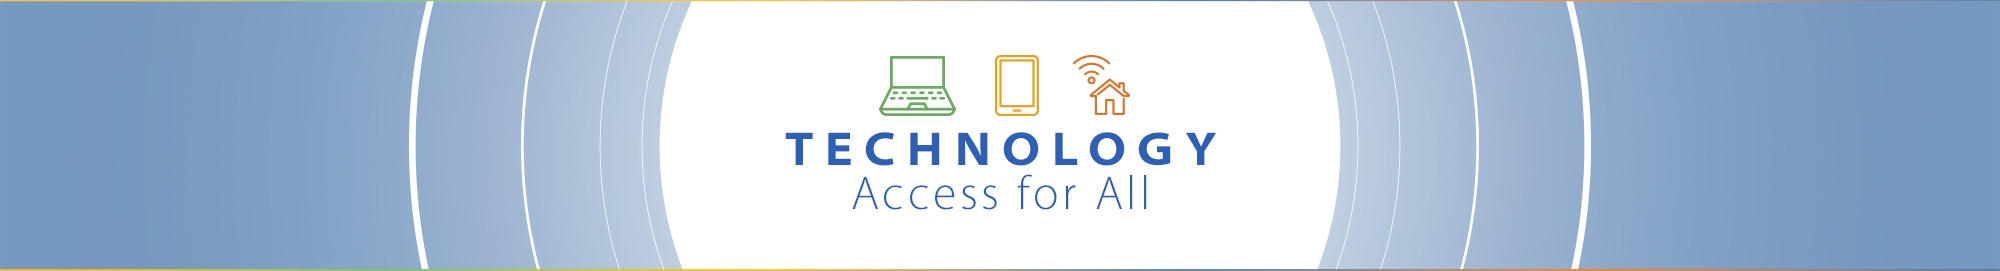 Technology Access for All Banner